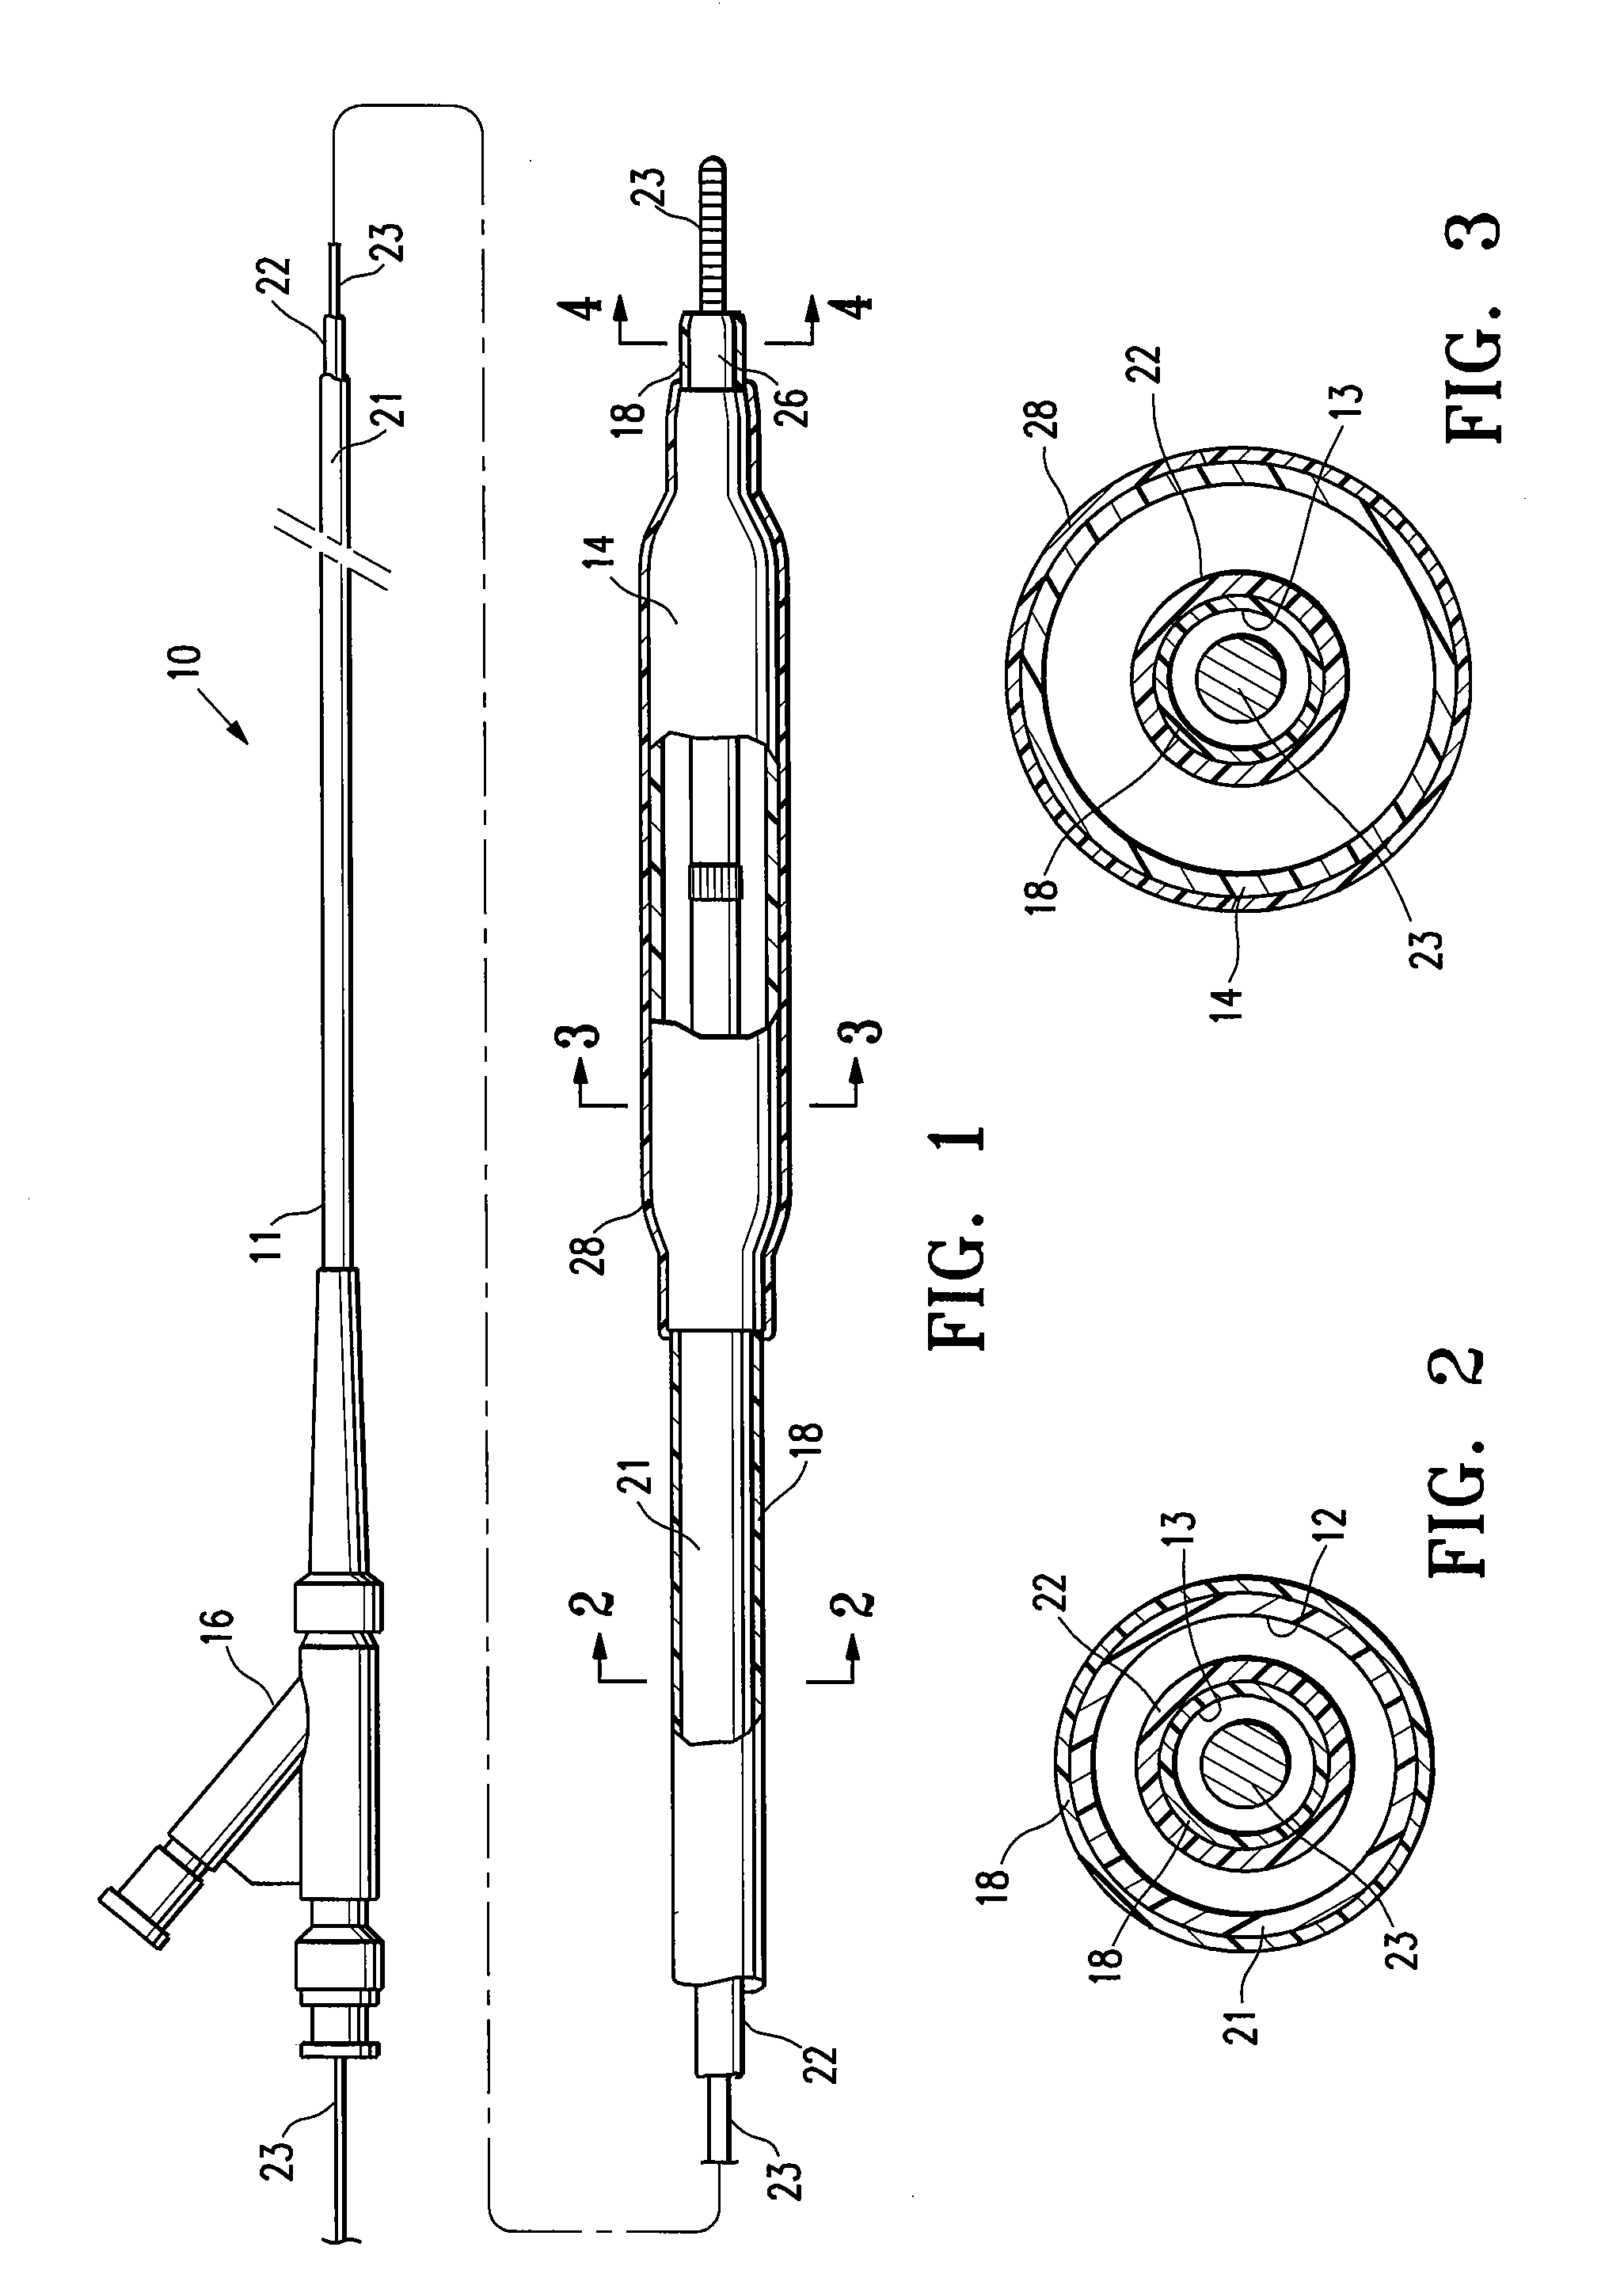 Medical devices having a lubricious coating with a hydrophilic compound in an interlocking network